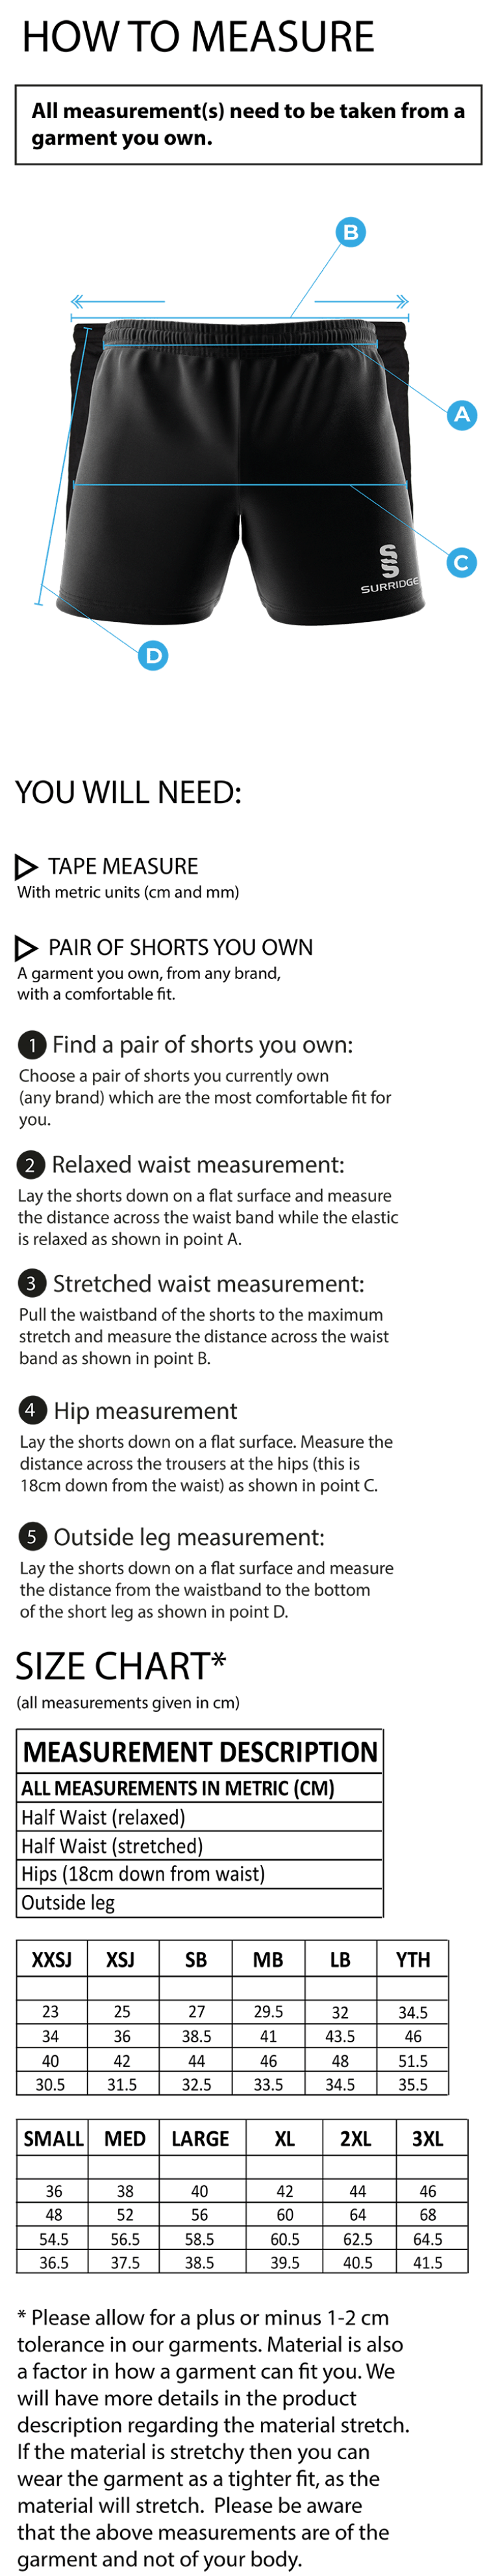 Premier Rugby Short White - Size Guide